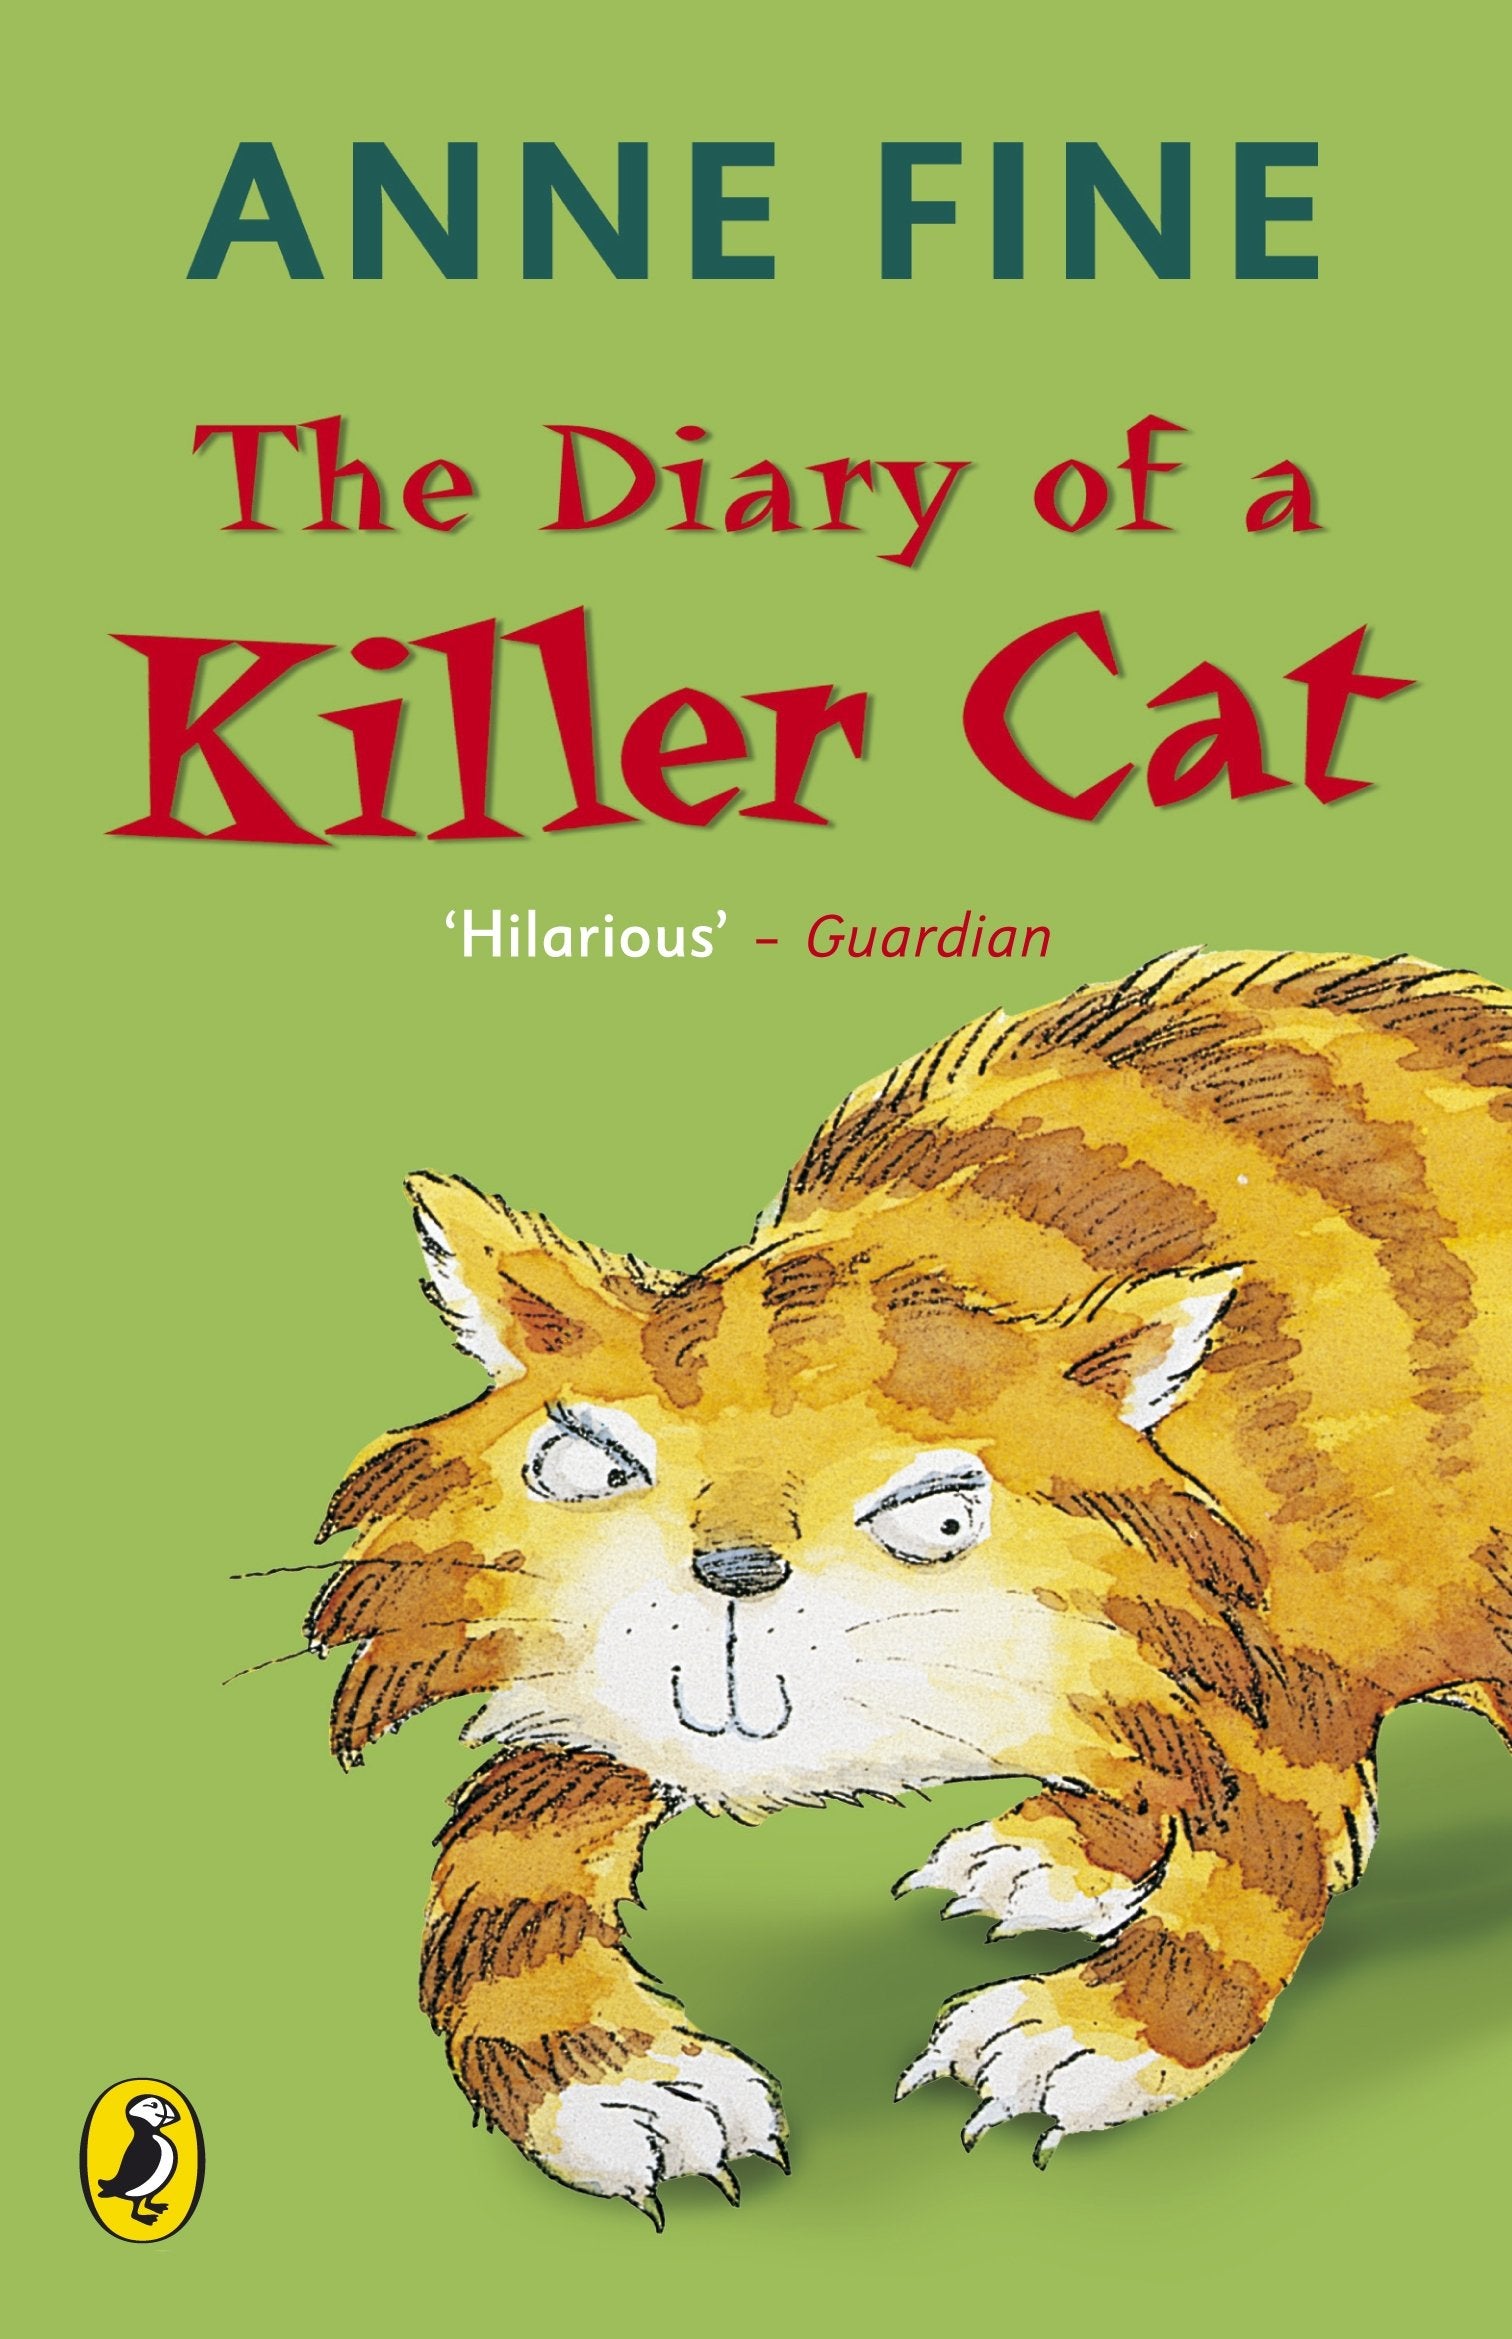 Fine’s ‘Killer Cat’ series about a cat called Tuffy and his family, as told by the murderous cat himself, is a wickedly funny look inside the mind of a feline